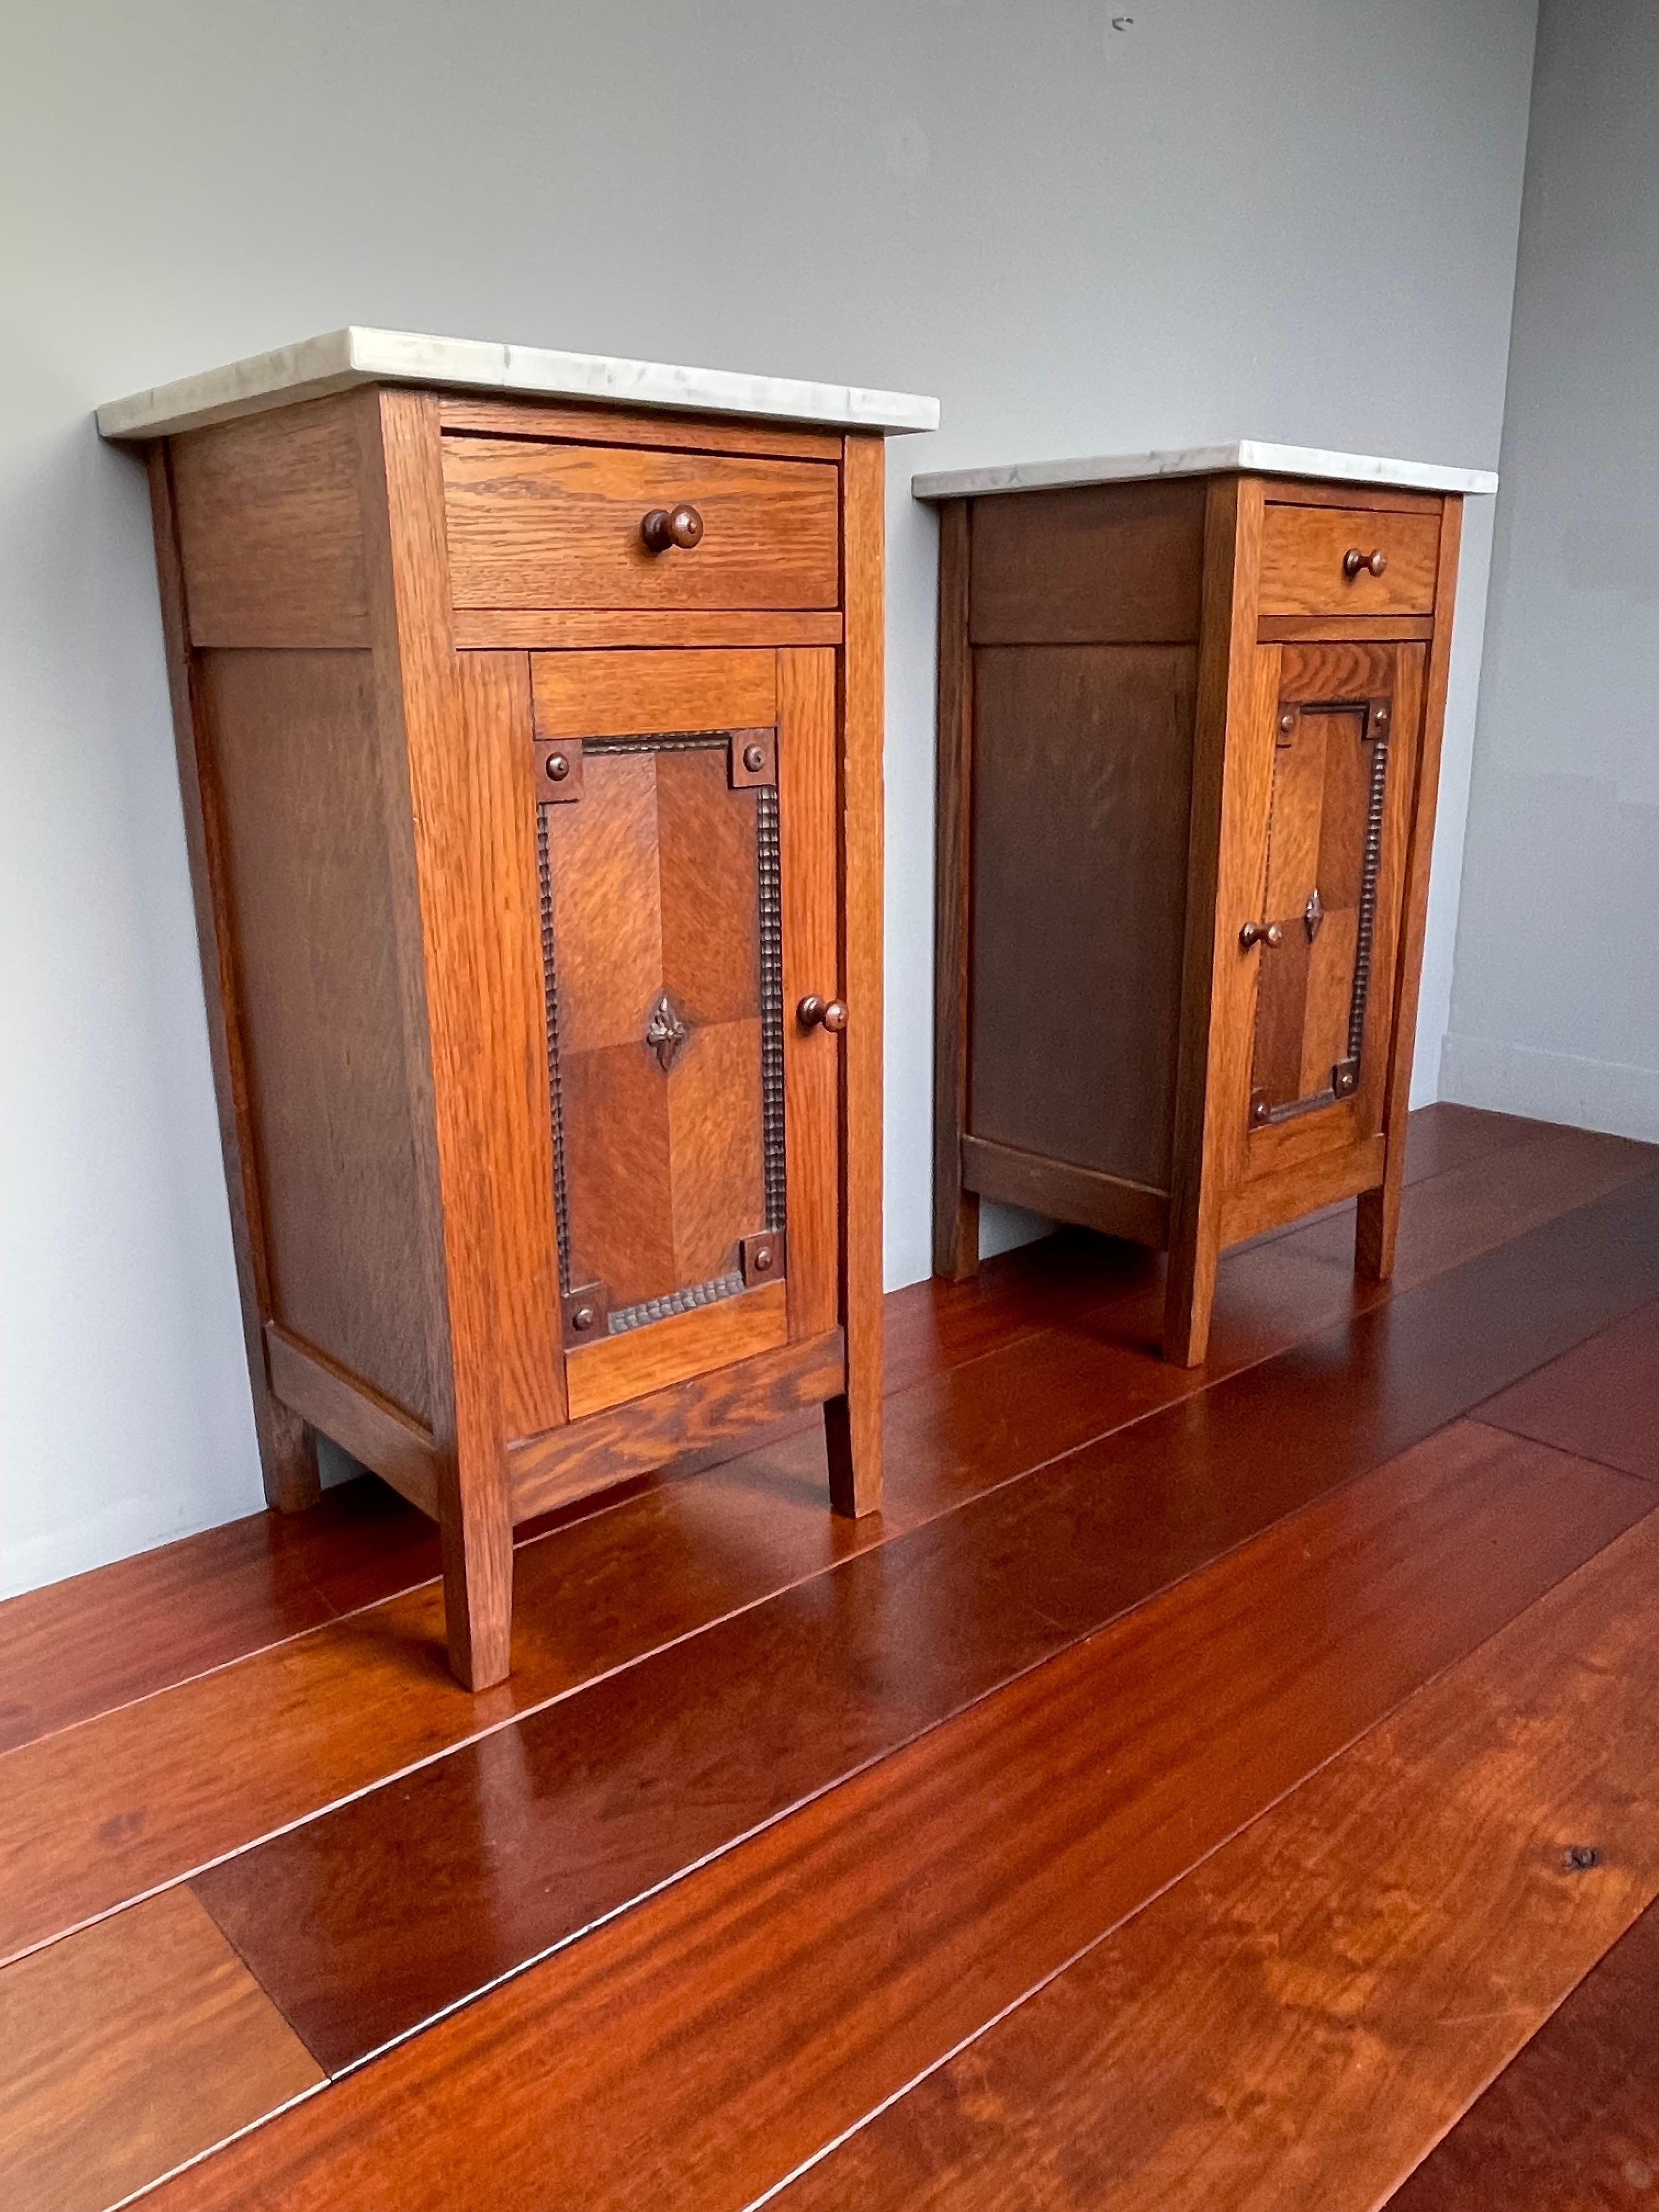 Beautiful pair of Arts & Crafts nightstands with original marble tops.

If you are looking for timeless and beautifully handcrafted bedside cabinets then this Arts & Crafts pair could be yours to own and enjoy soon. They are made of a beautiful